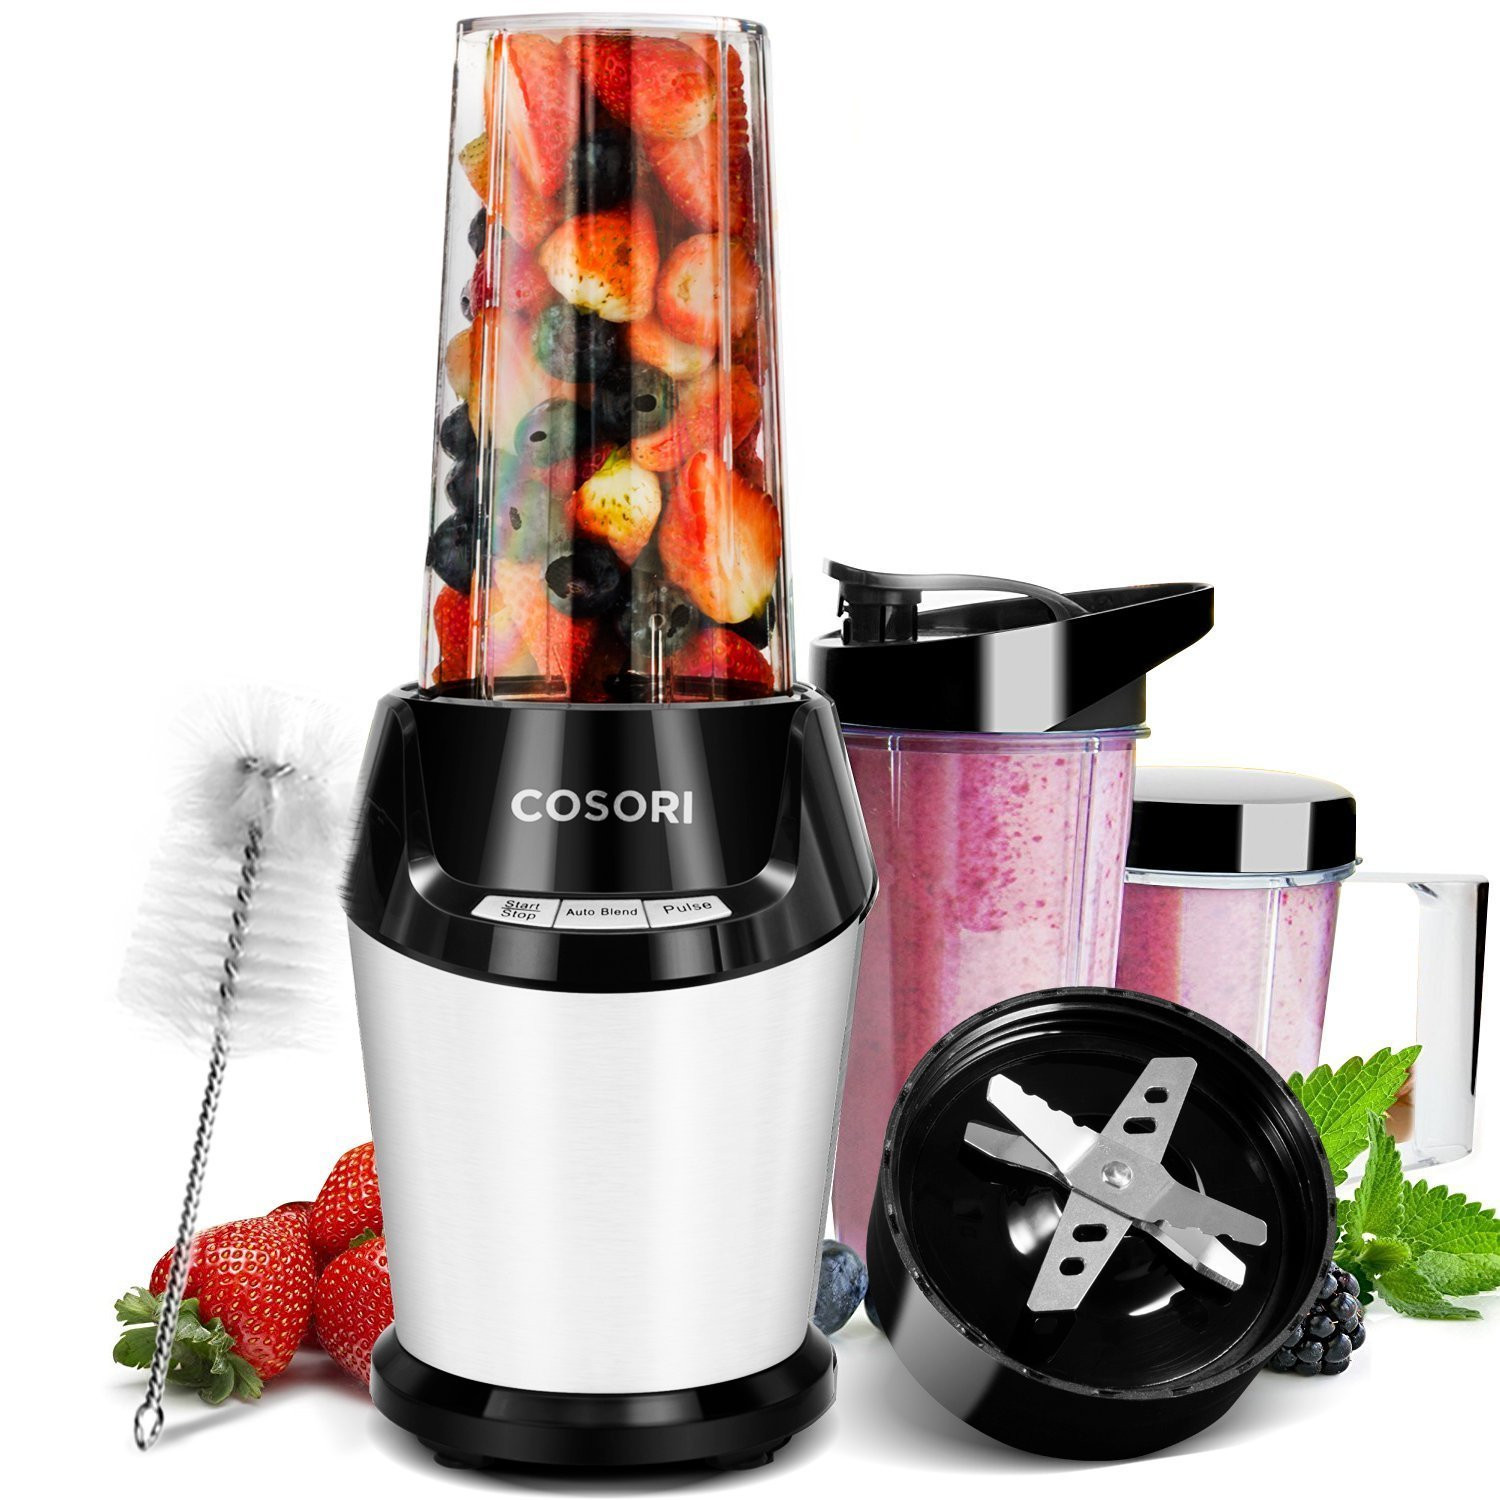 Blender For Smoothies
 Top 10 Best Personal Blenders for Smoothies Fruit